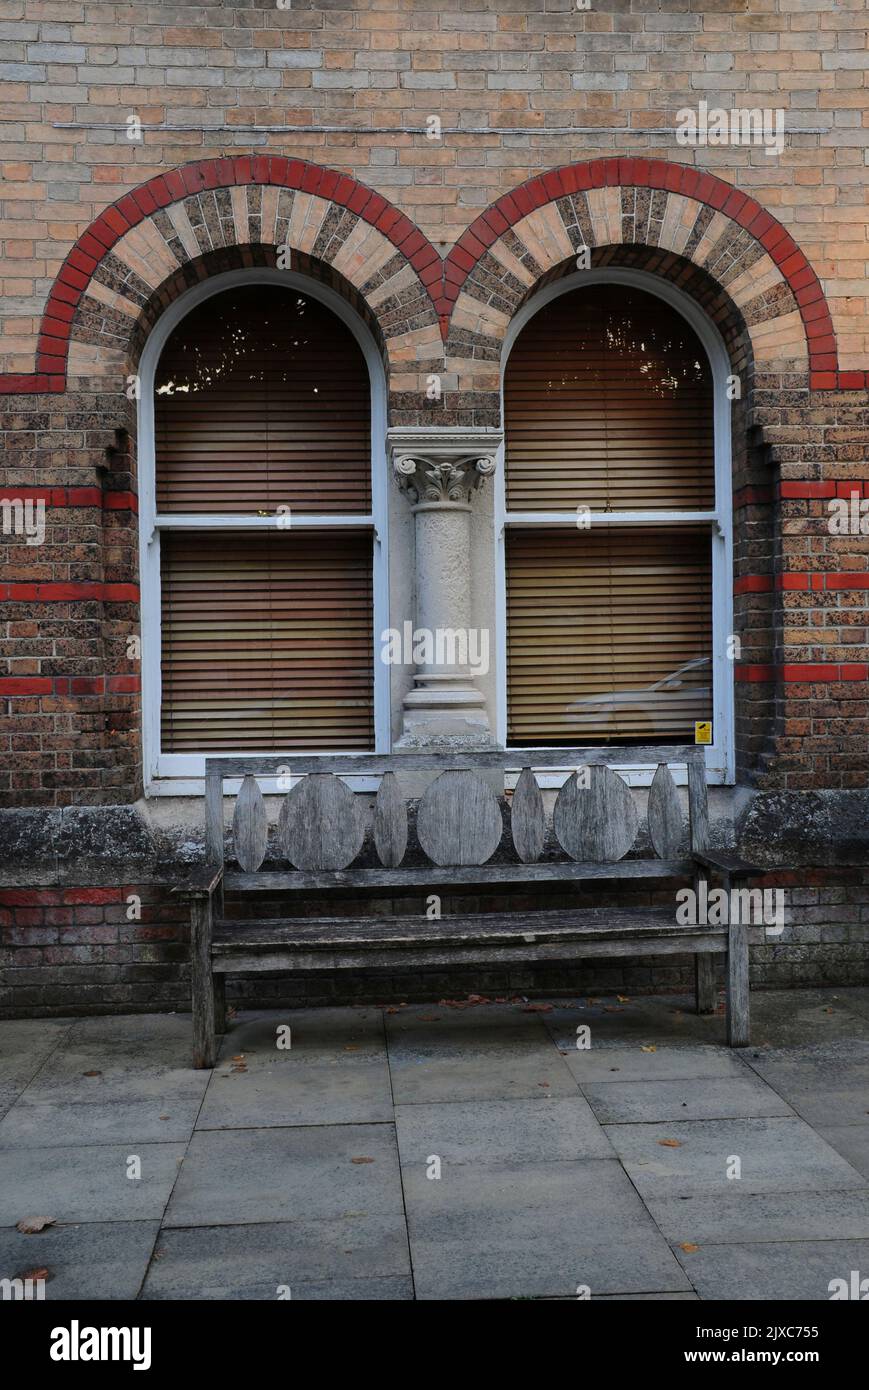 Ornate wooden seat and brickwork arches, Brewery Square, Dorchester, Dorset, UK Stock Photo